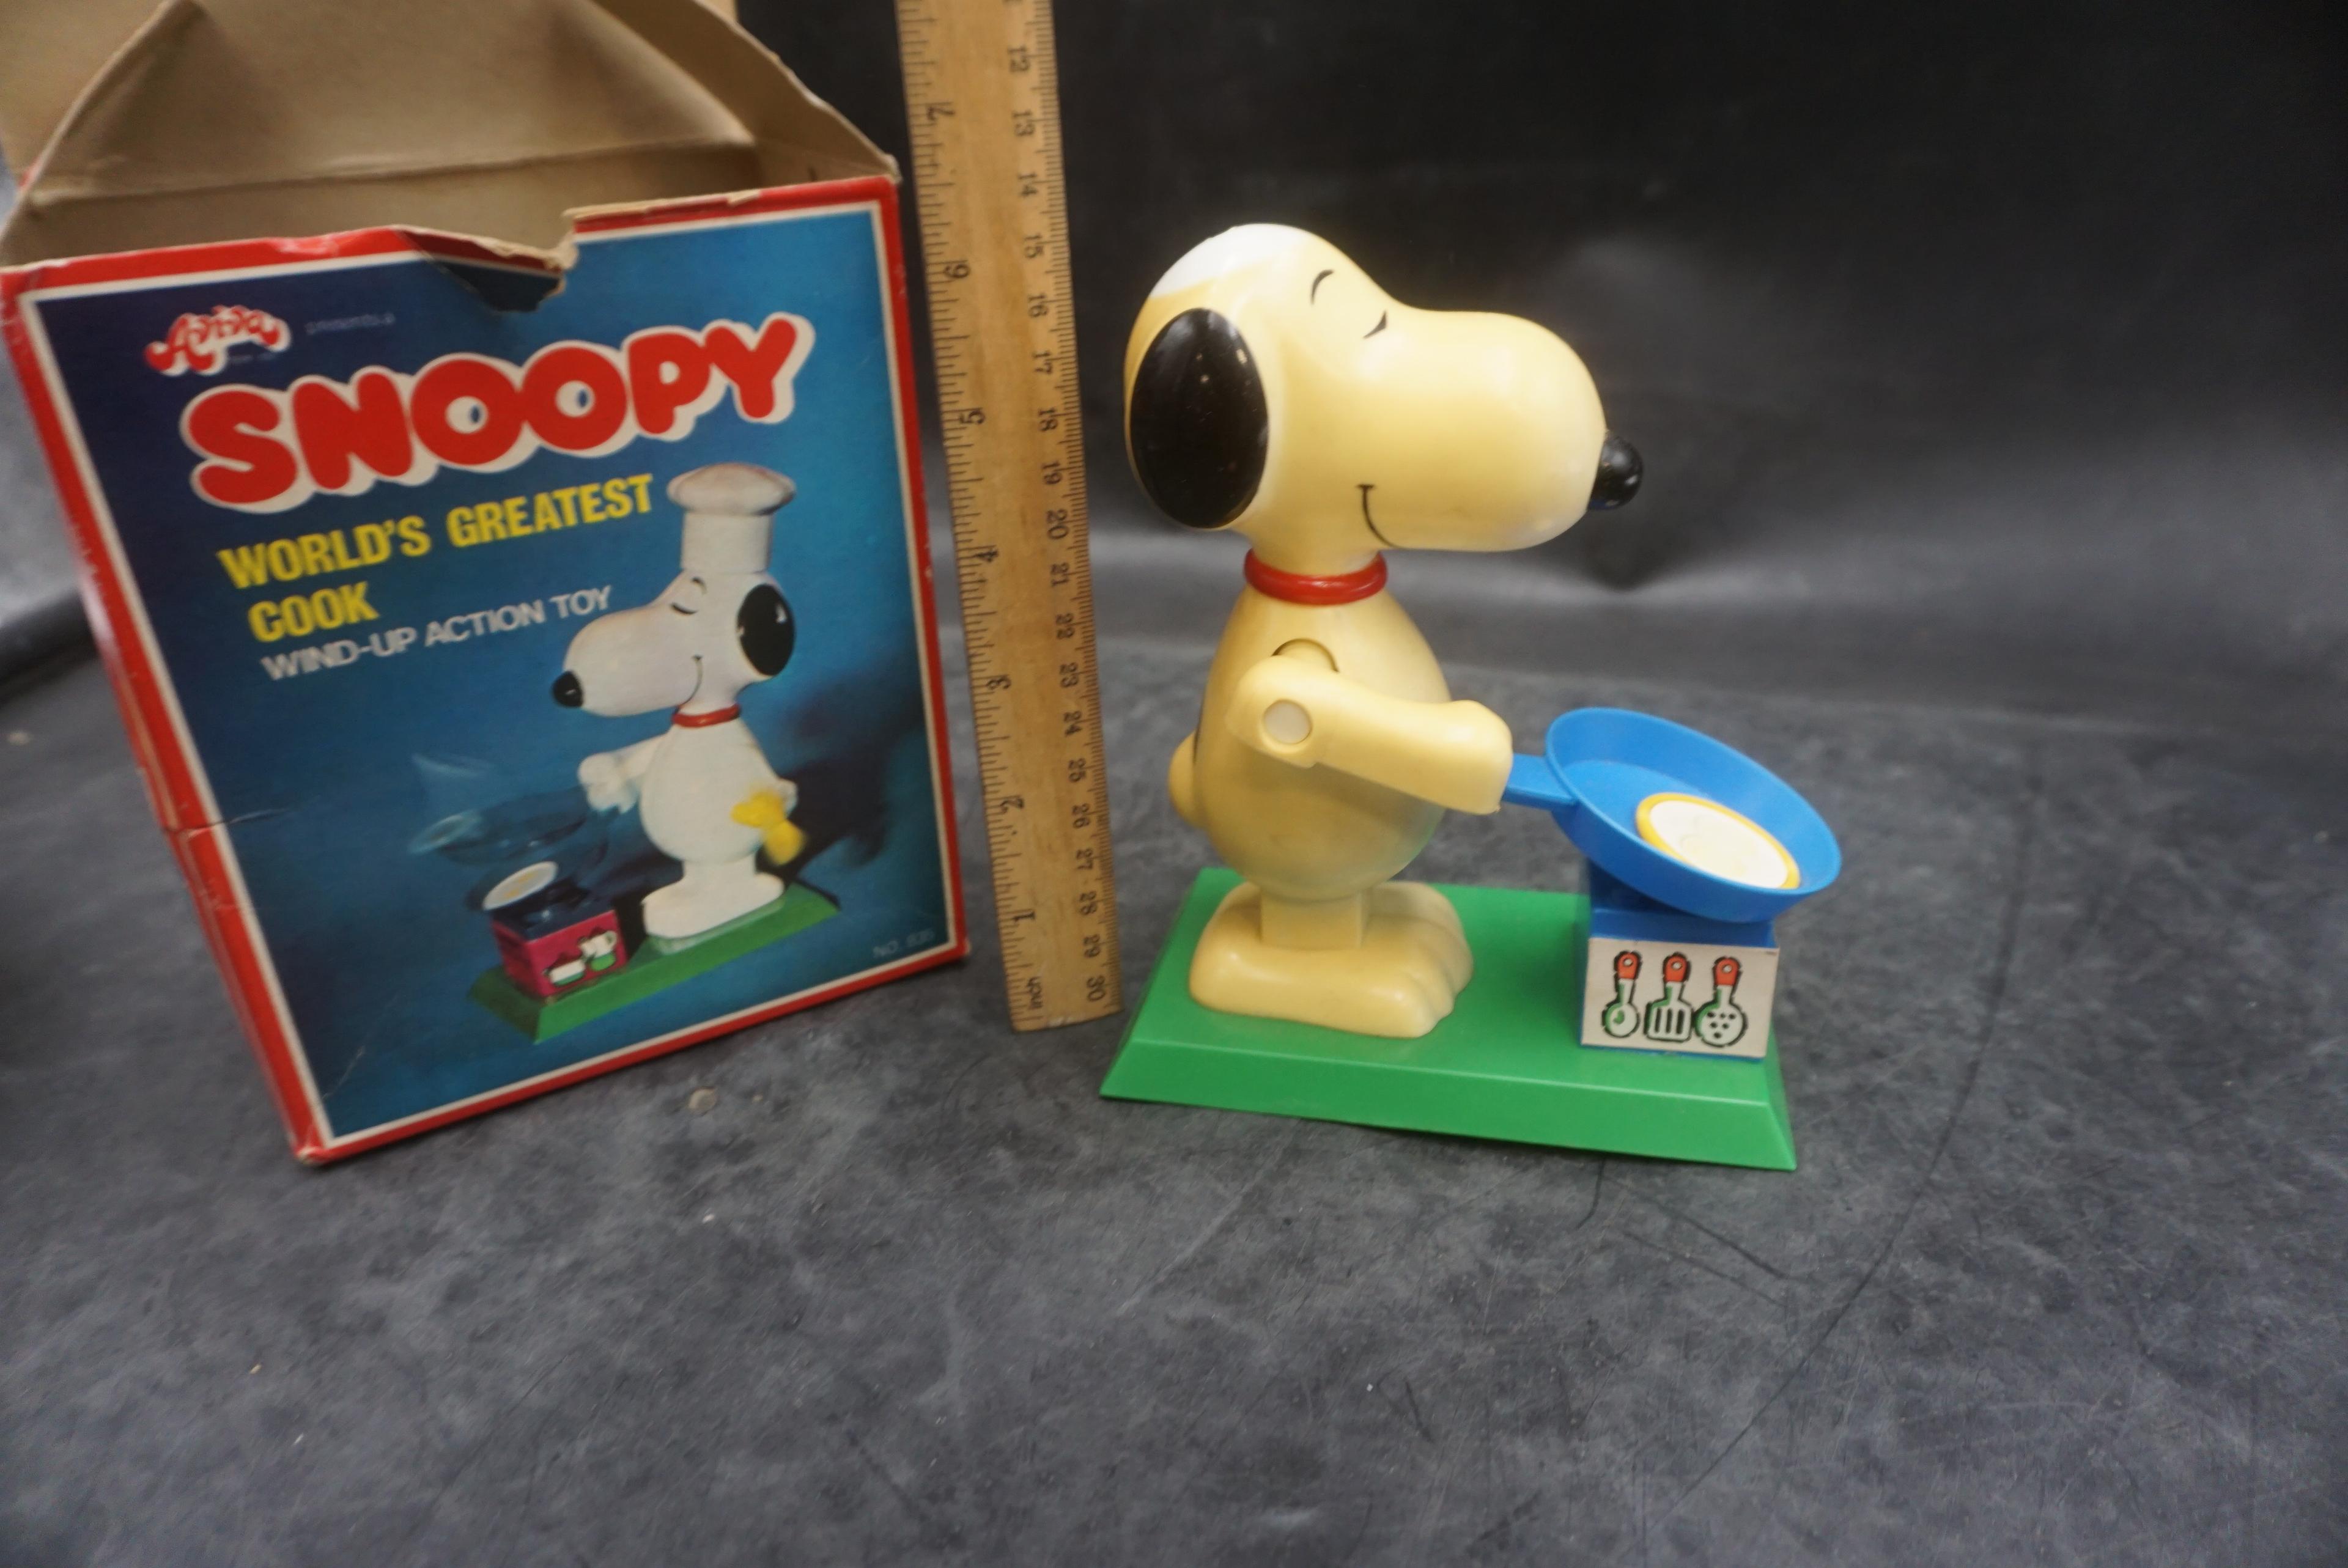 Snoopy World'S Greatest Cook - Wind-Up Action Toy